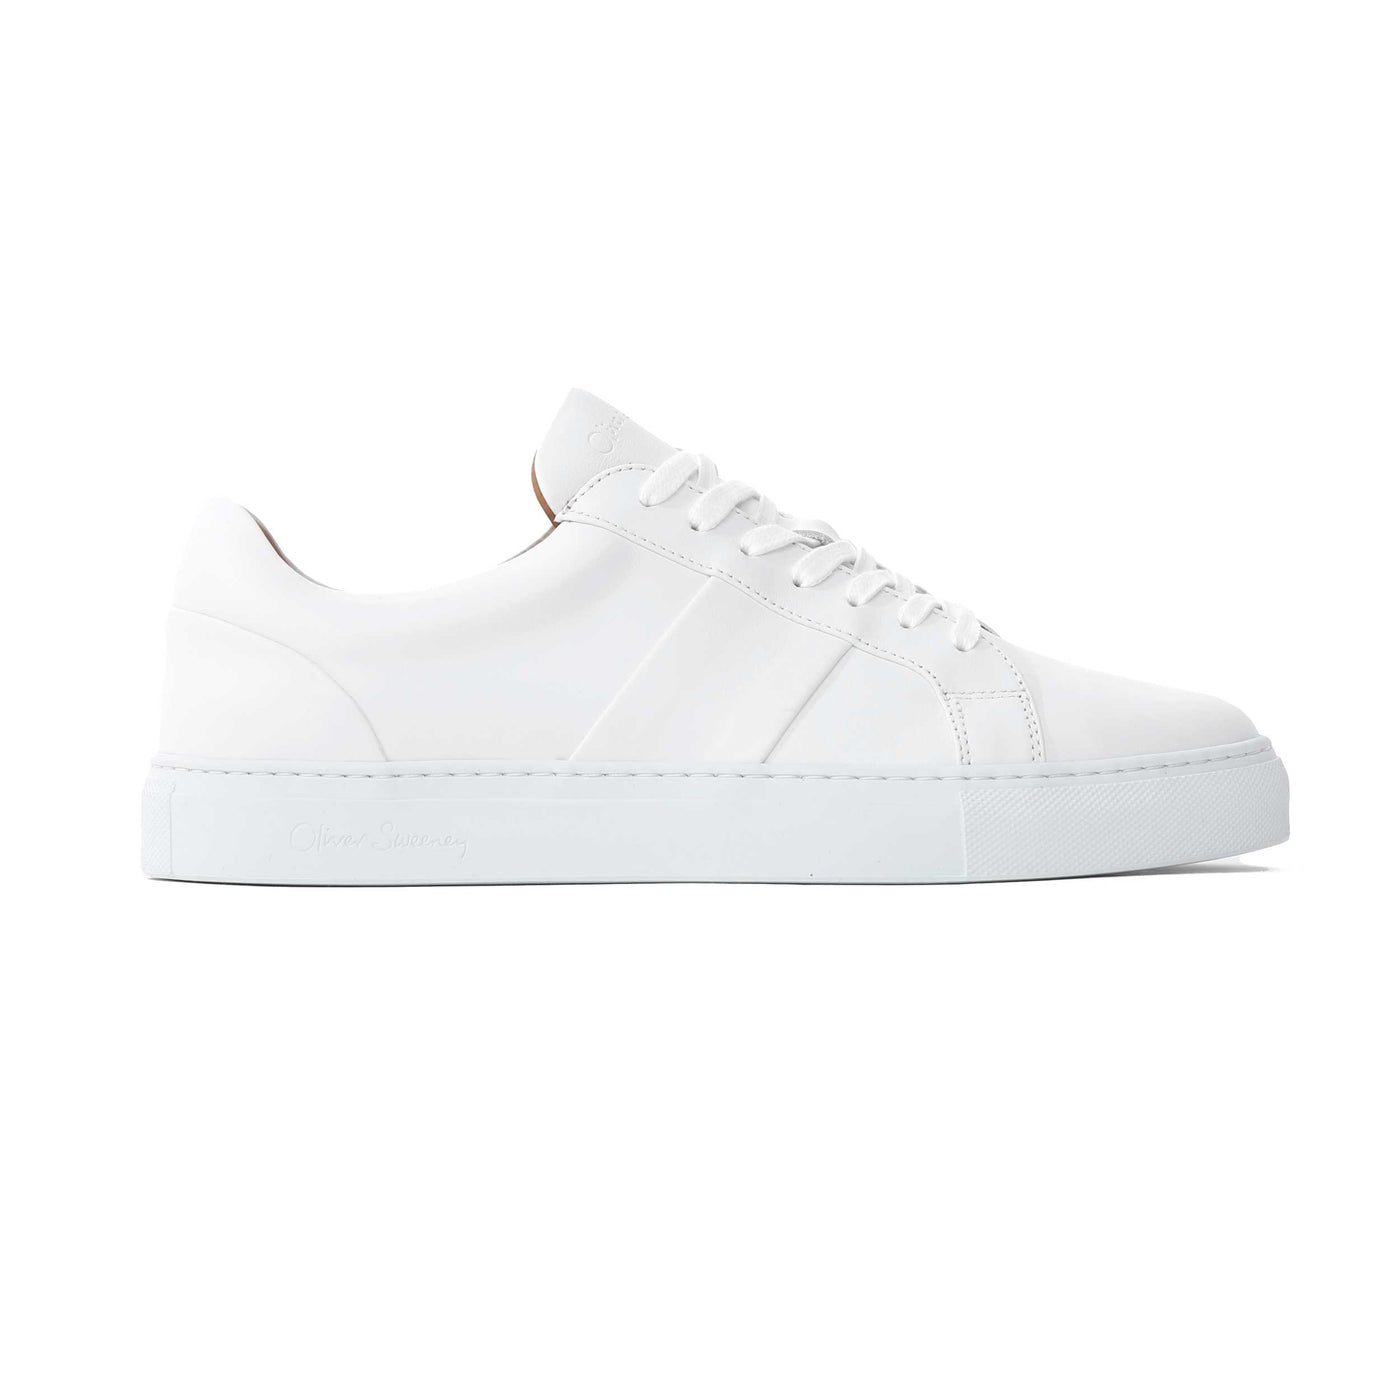 Oliver Sweeney Quintos Trainer in White